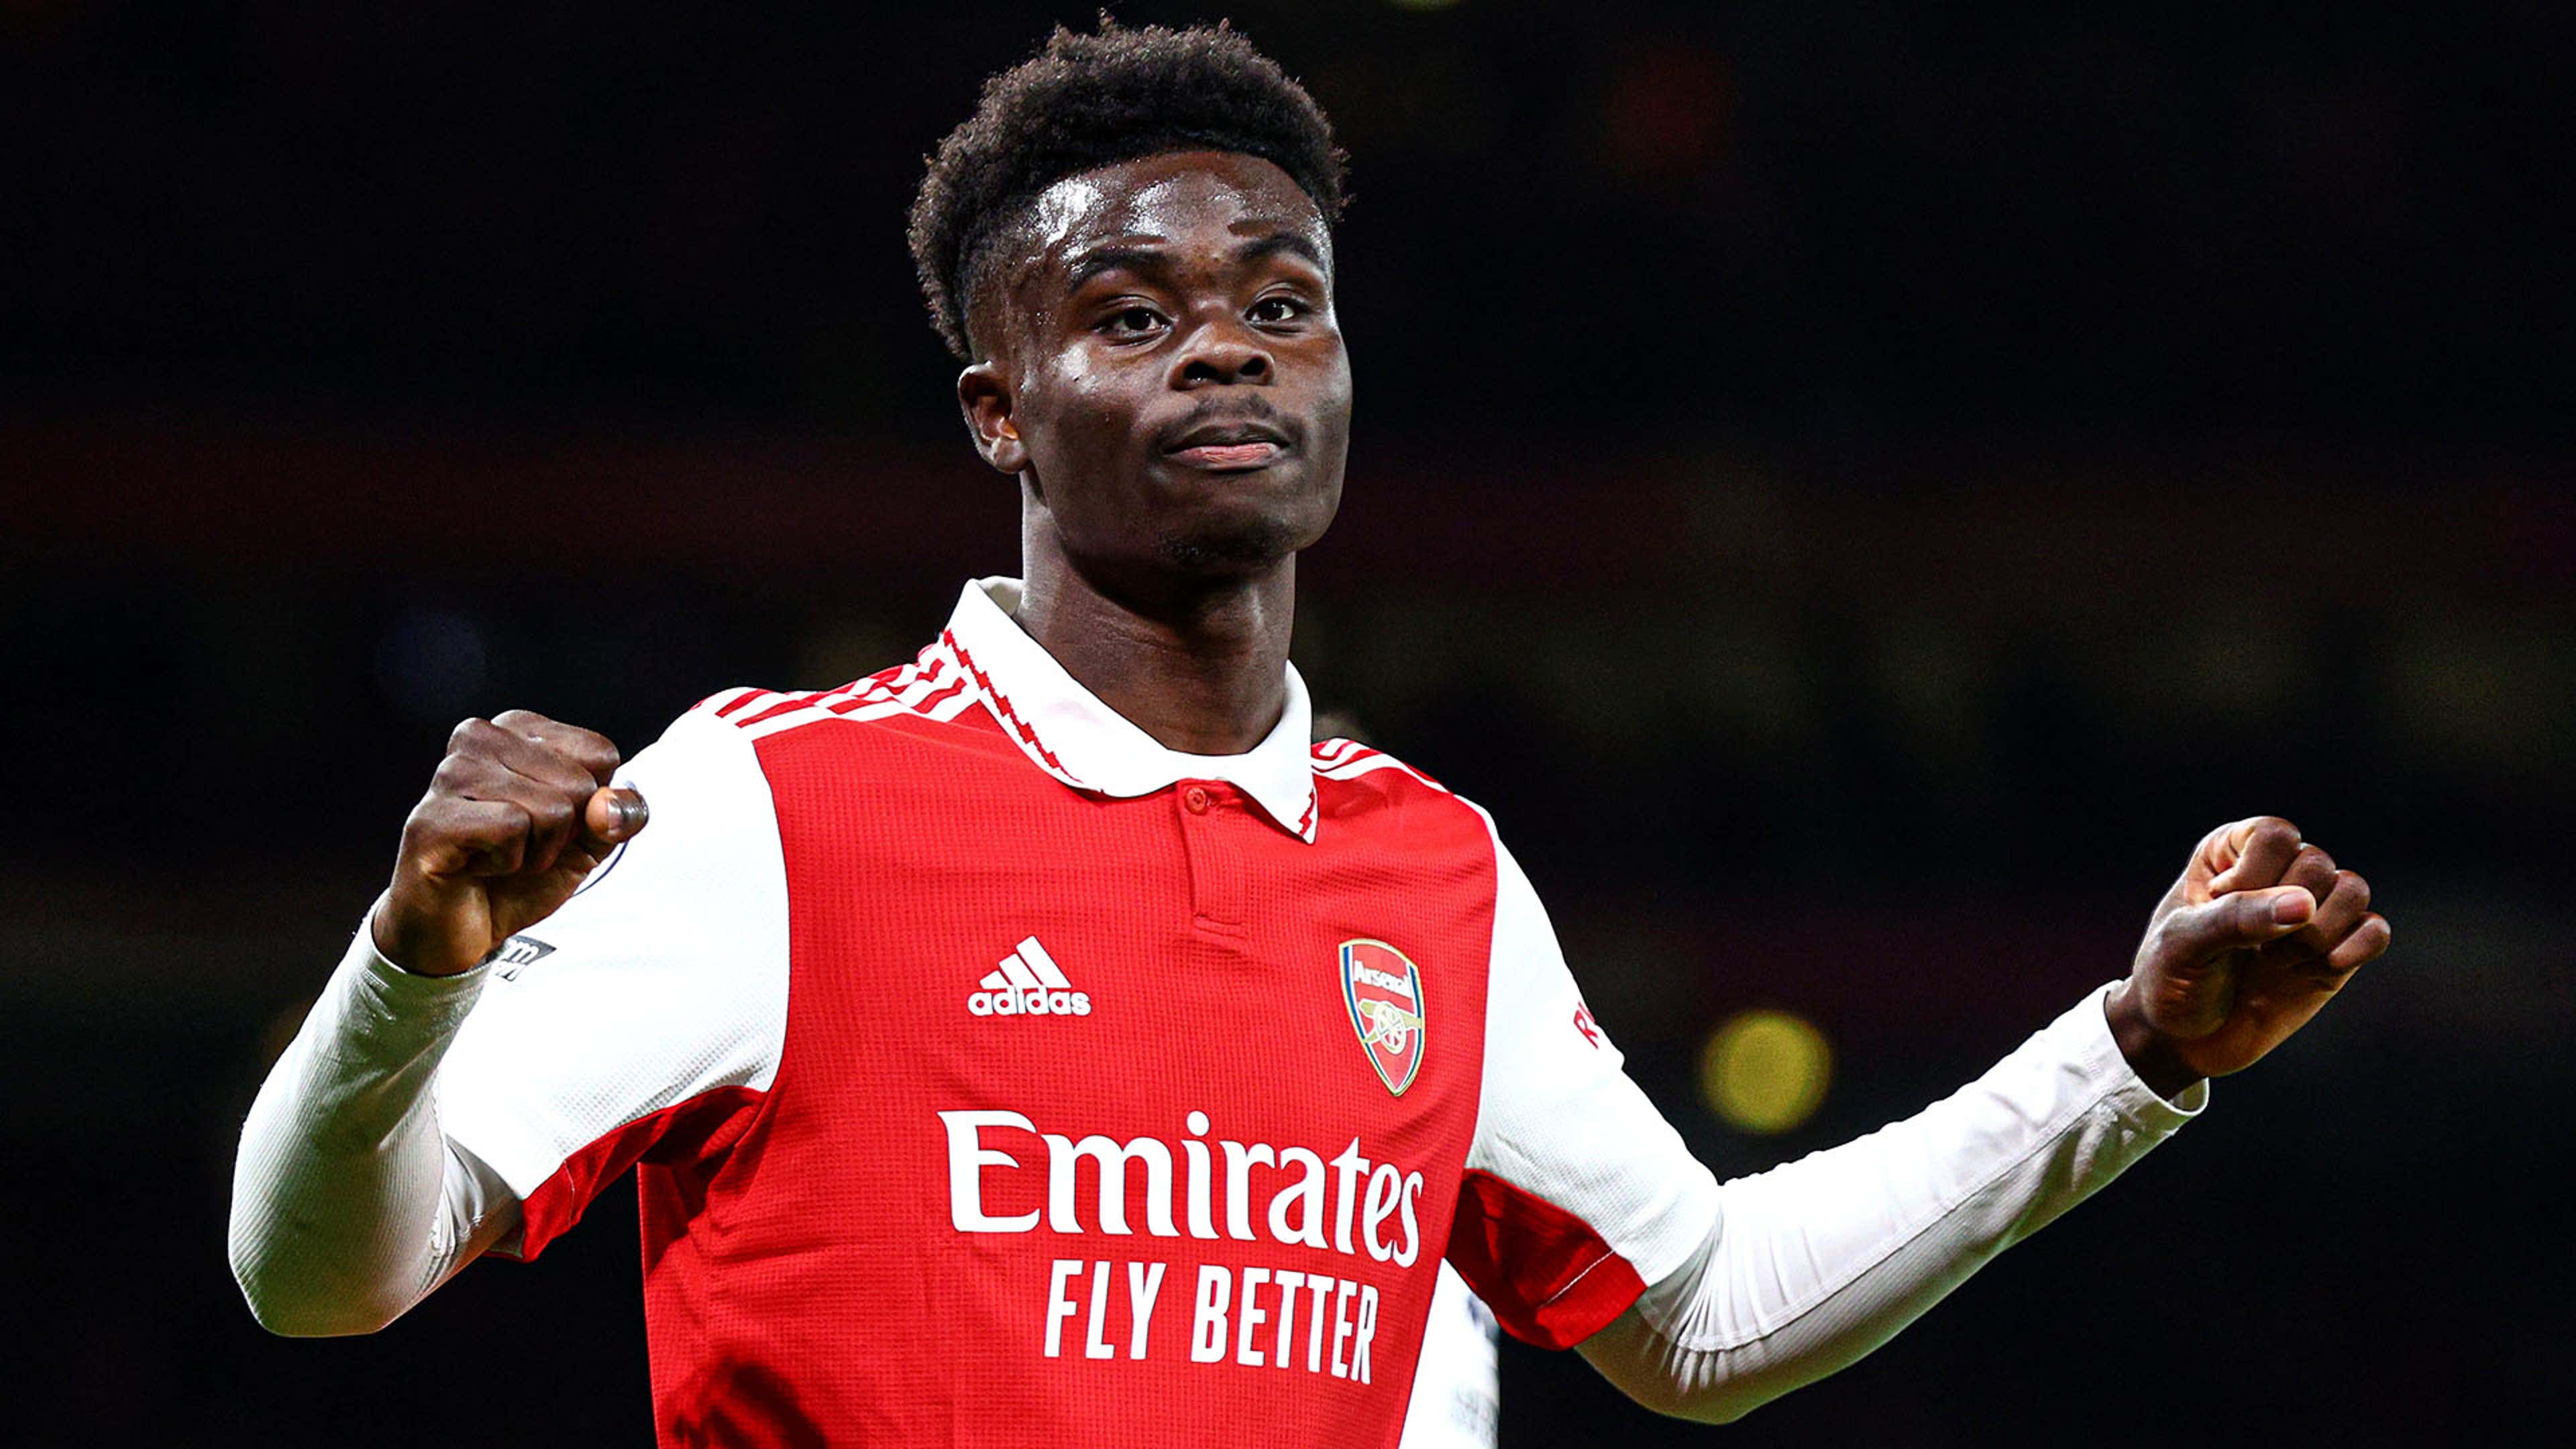 WATCH: No stopping that! Bukayo Saka blasts Arsenal into the lead against  Everton with fine goal | Goal.com India